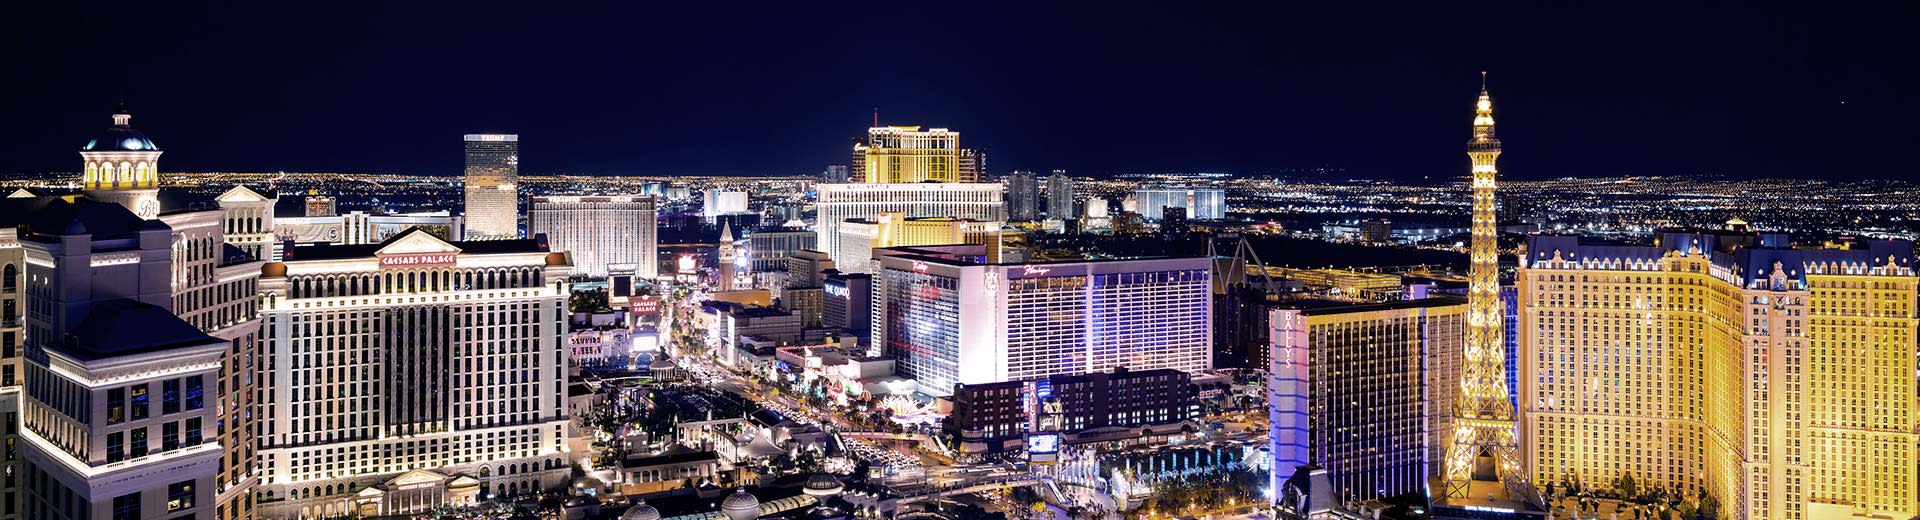 The famous Las Vegas strip lit up at night, with toweing casinos and streets filled with cars.